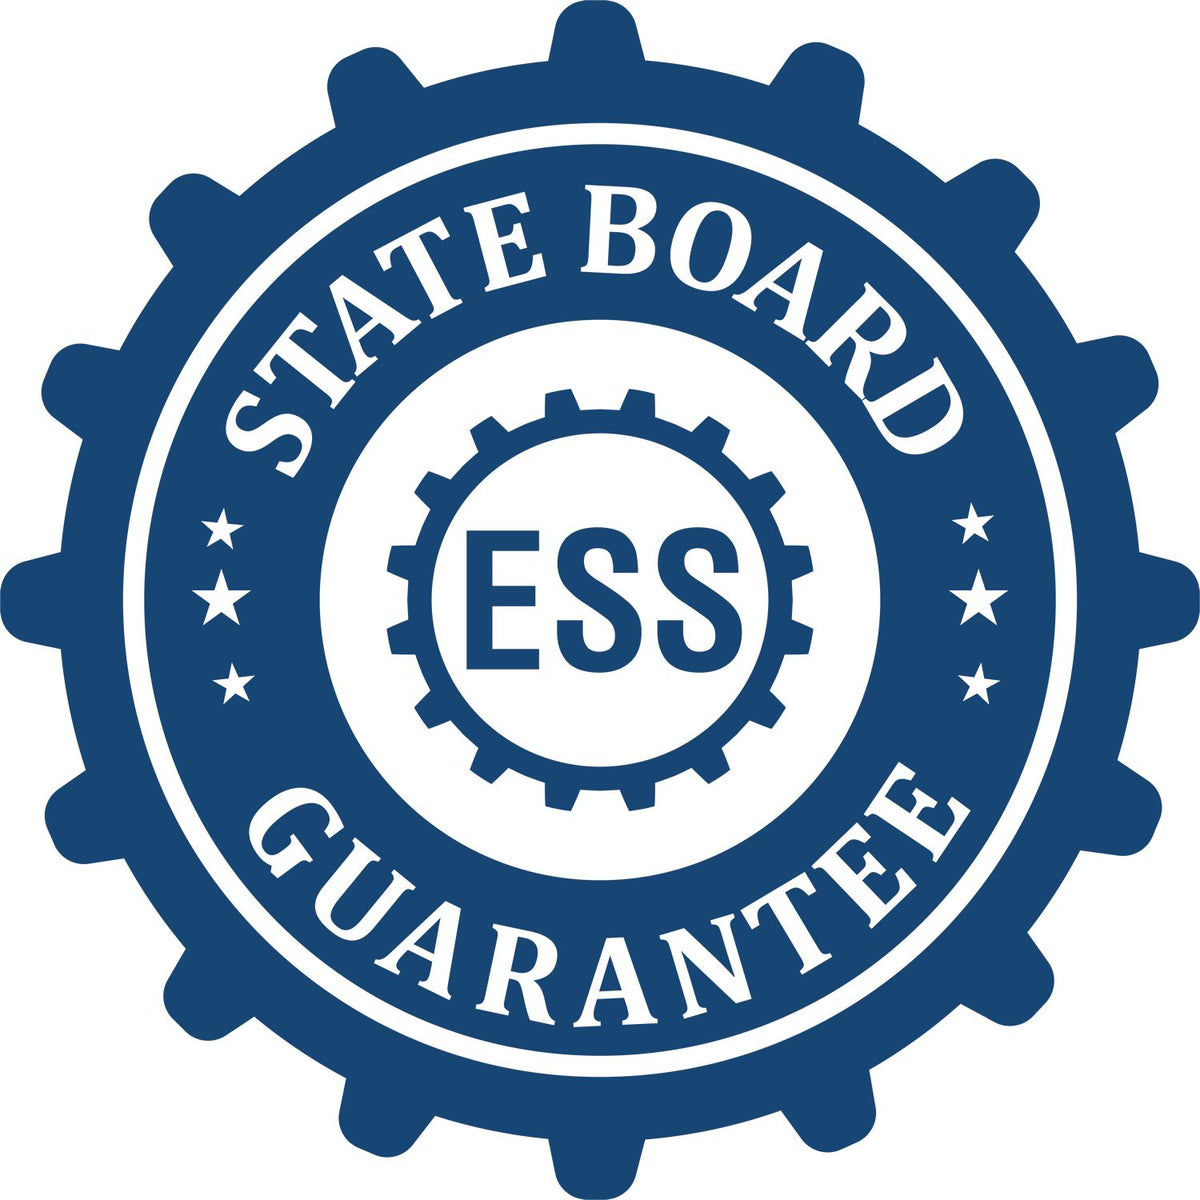 An emblem in a gear shape illustrating a state board guarantee for the State of West Virginia Extended Long Reach Engineer Seal product.